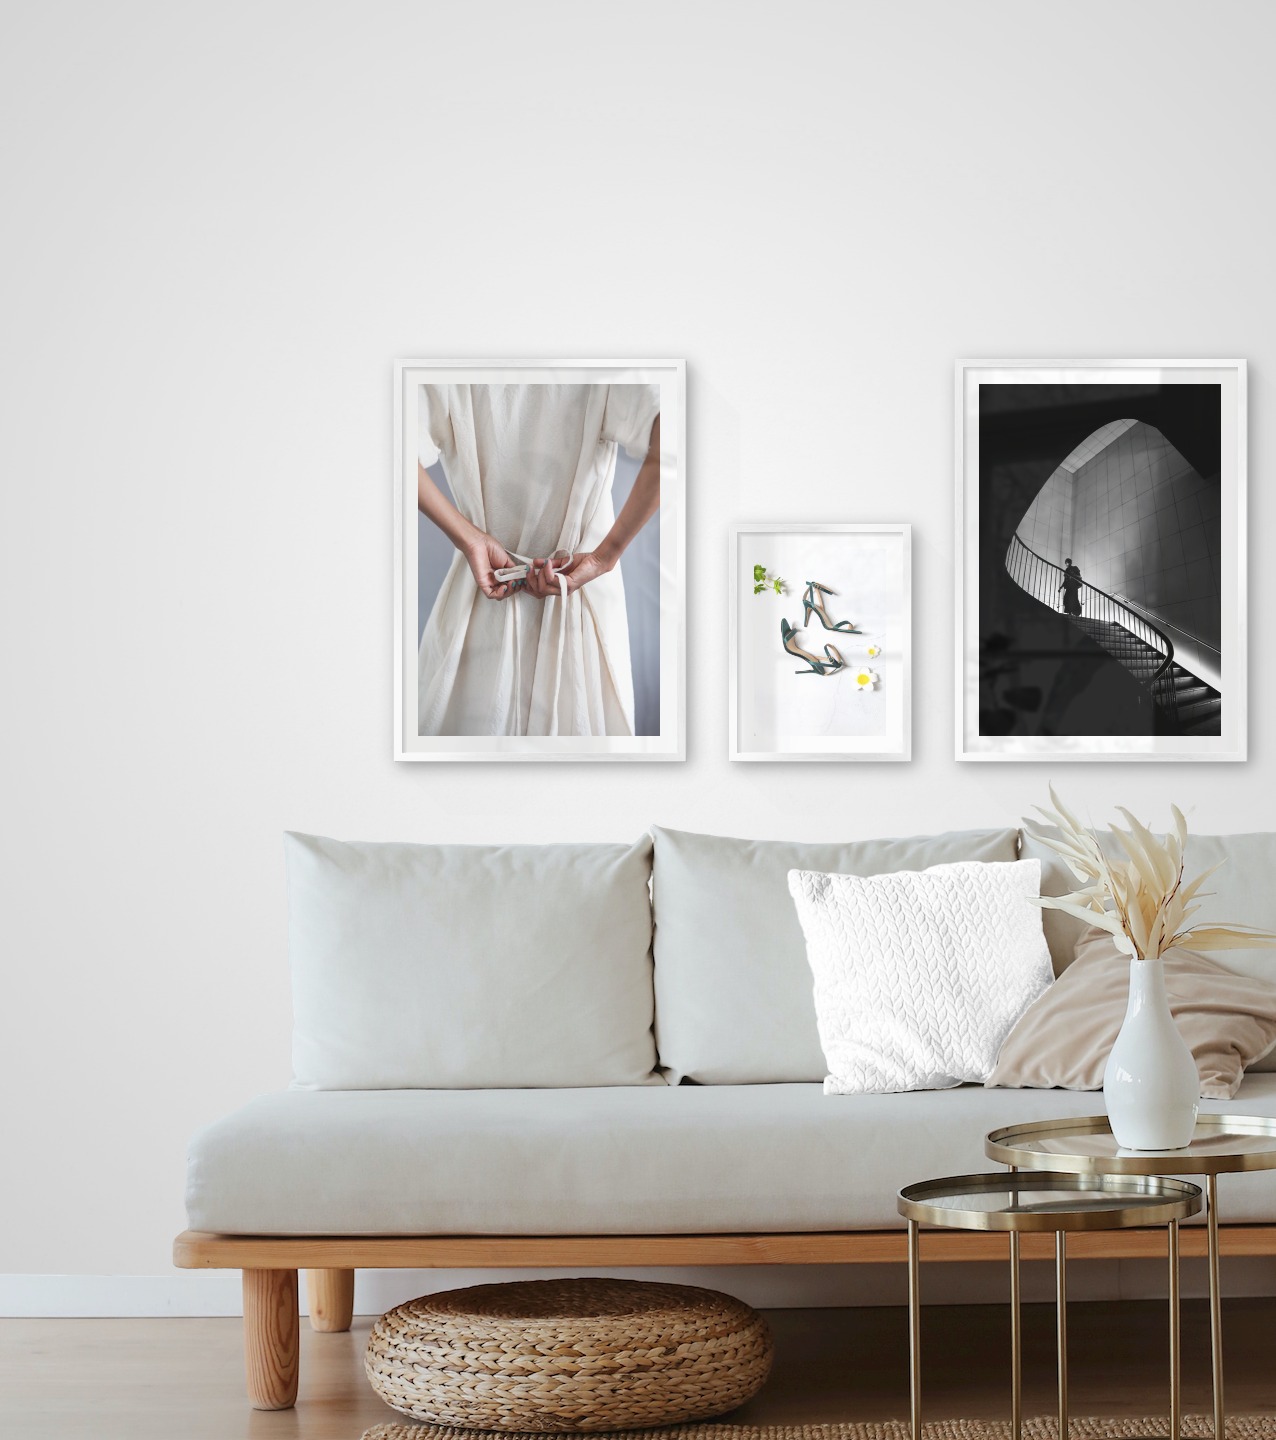 Gallery wall with picture frames in silver in sizes 50x70 and 30x40 with prints "Dress with waistband", "Heels" and "Staircase"